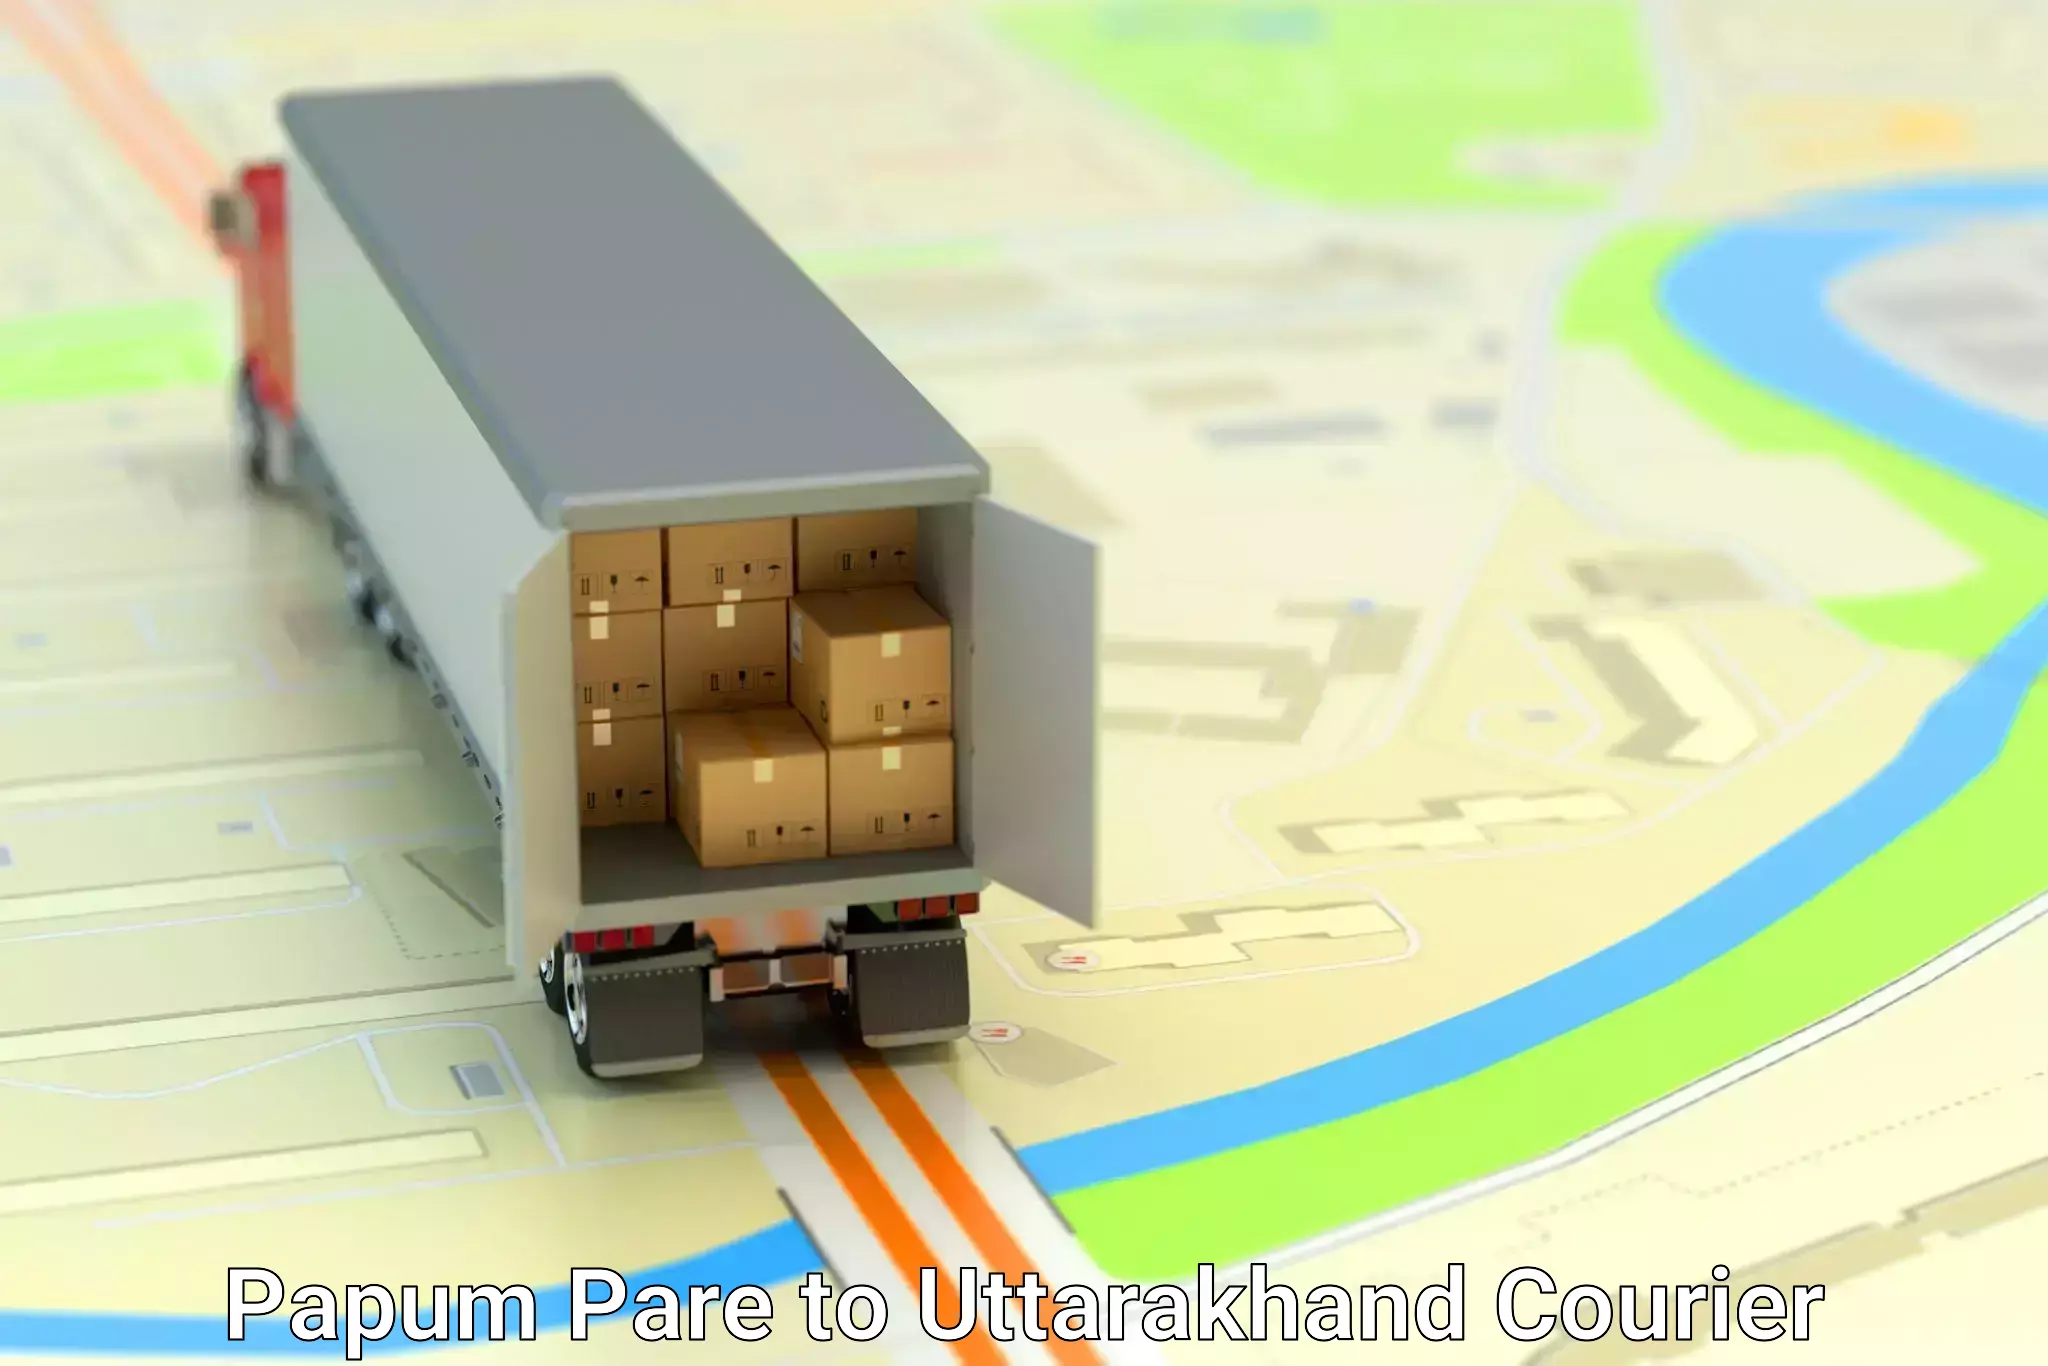 State-of-the-art courier technology Papum Pare to Lansdowne